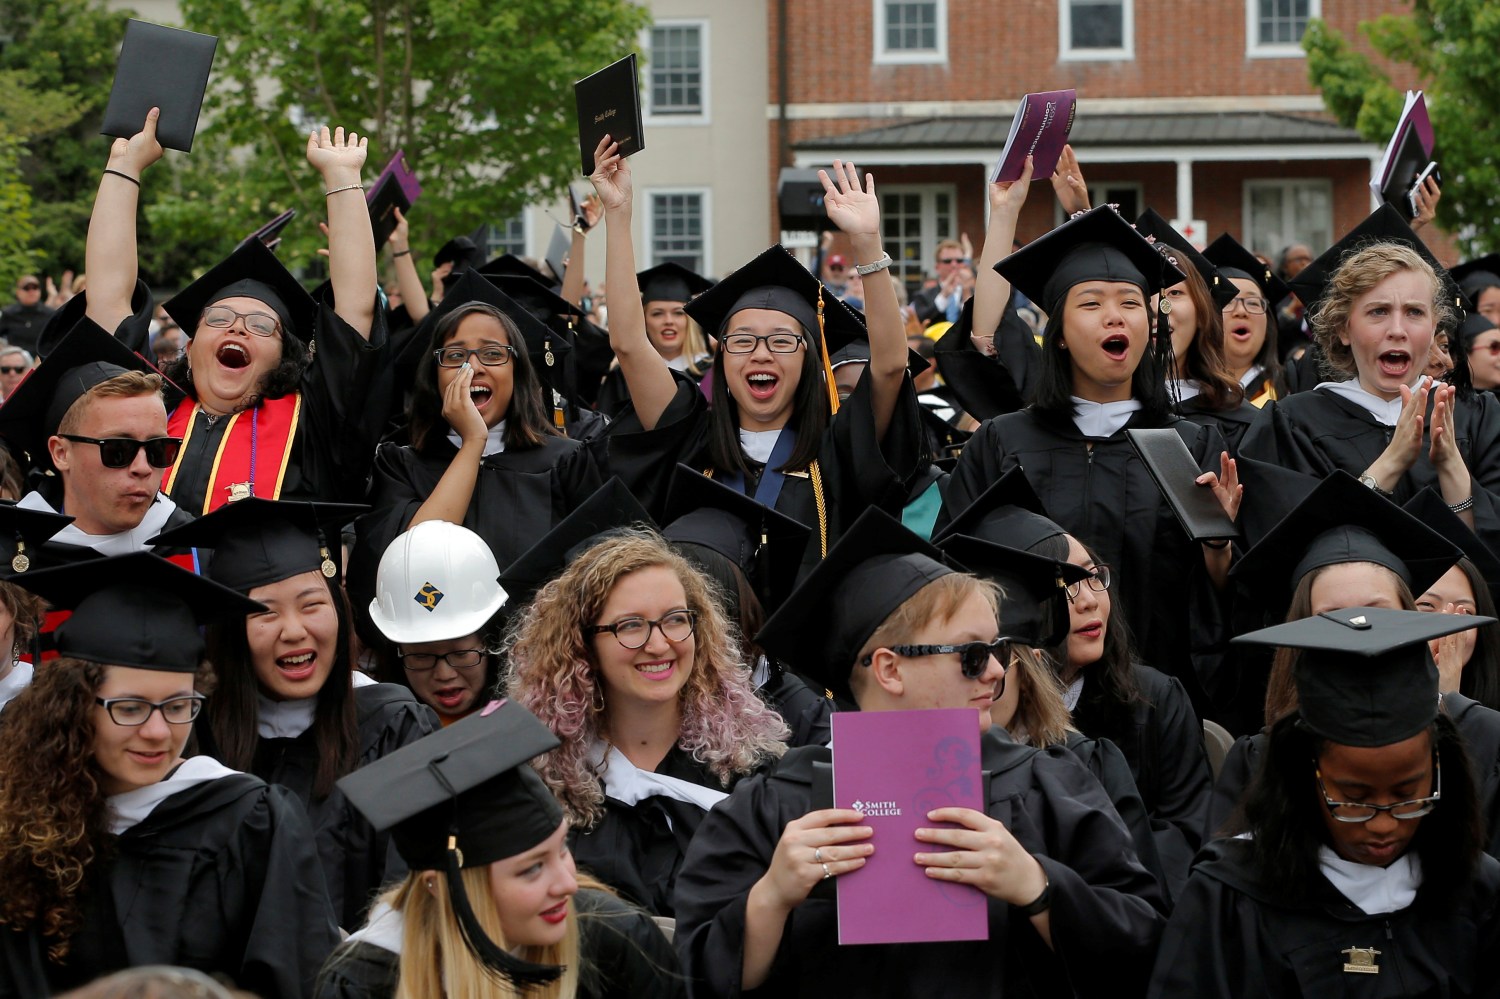 Graduating seniors react during Commencement ceremonies at Smith College in Northampton, Massachusetts, U.S., May 21, 2017.   REUTERS/Brian Snyder - RC1F1F41DBB0